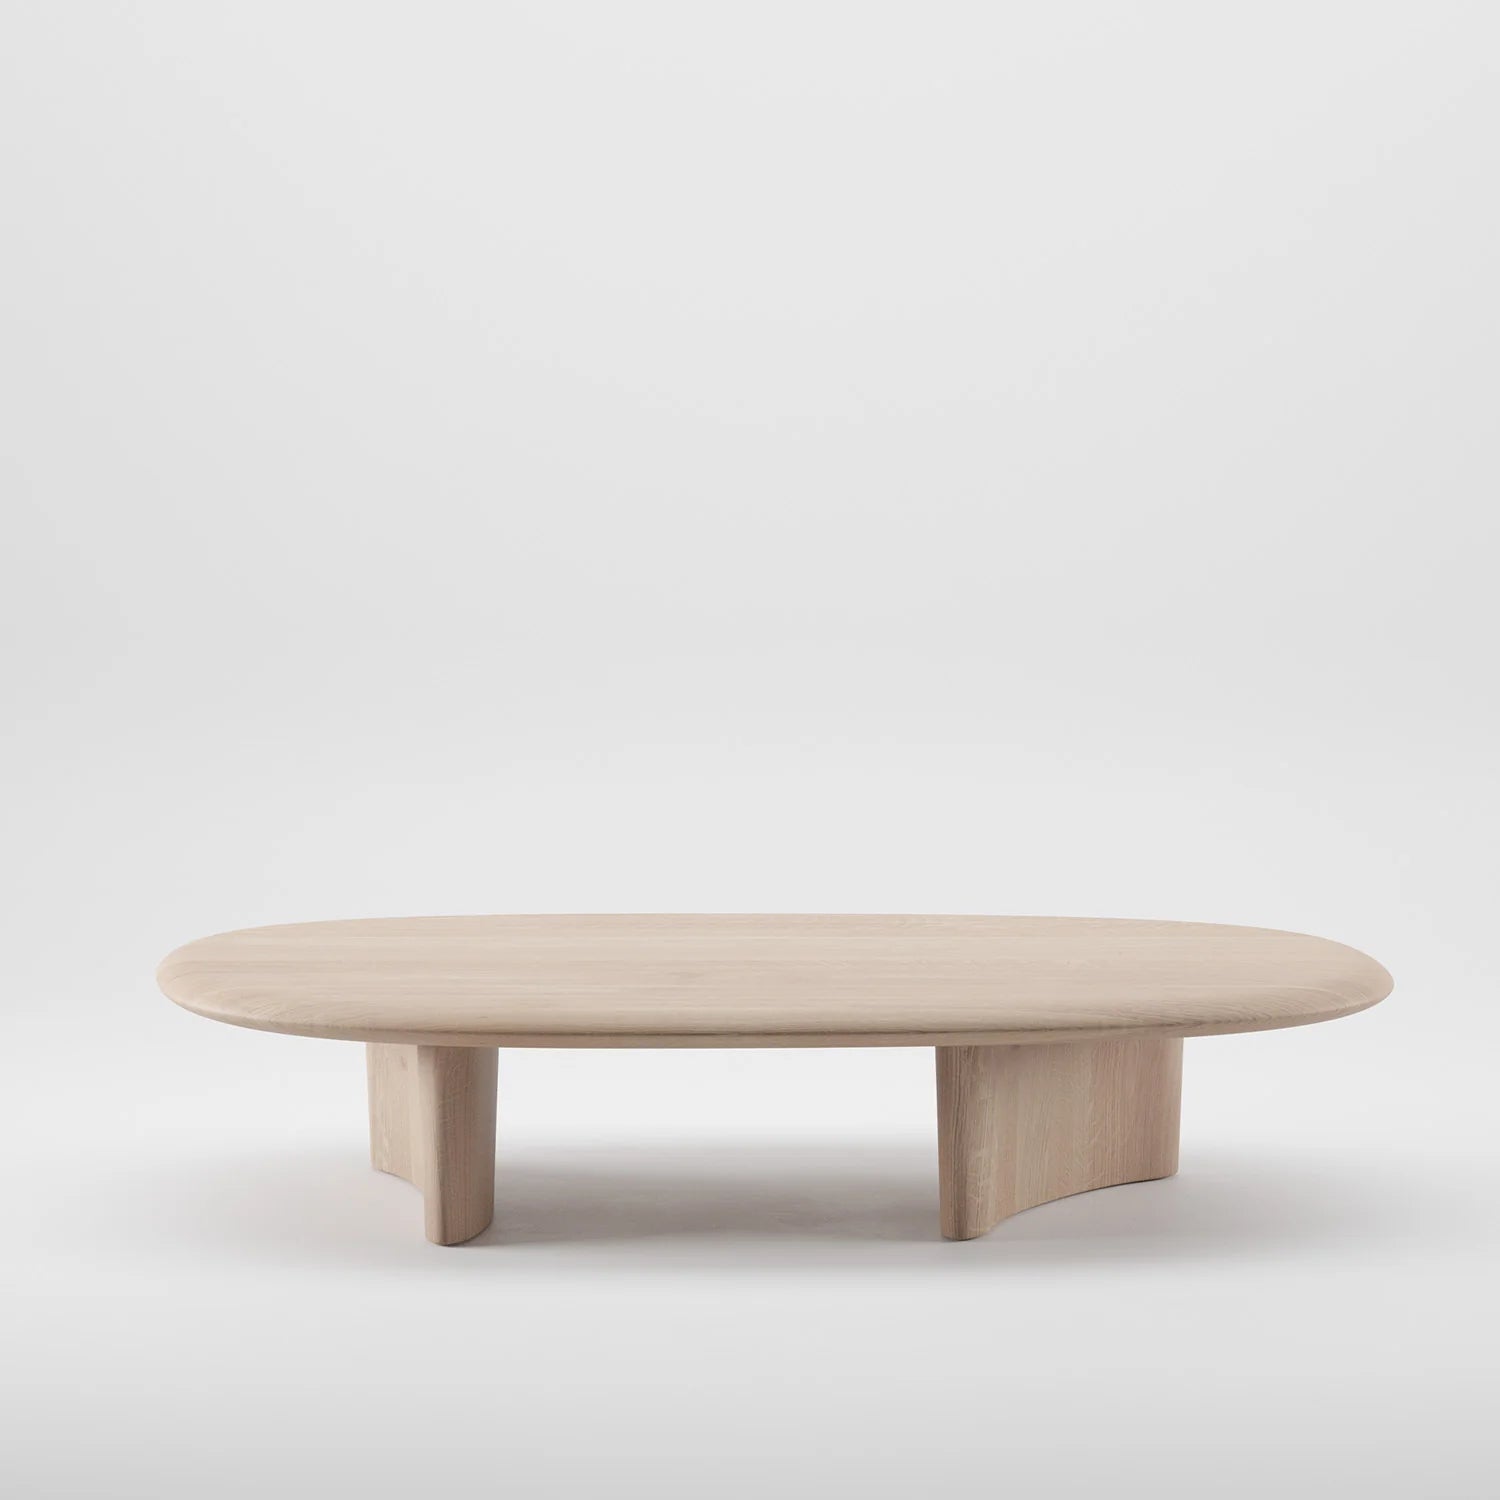 Artisan Monument oval coffee table